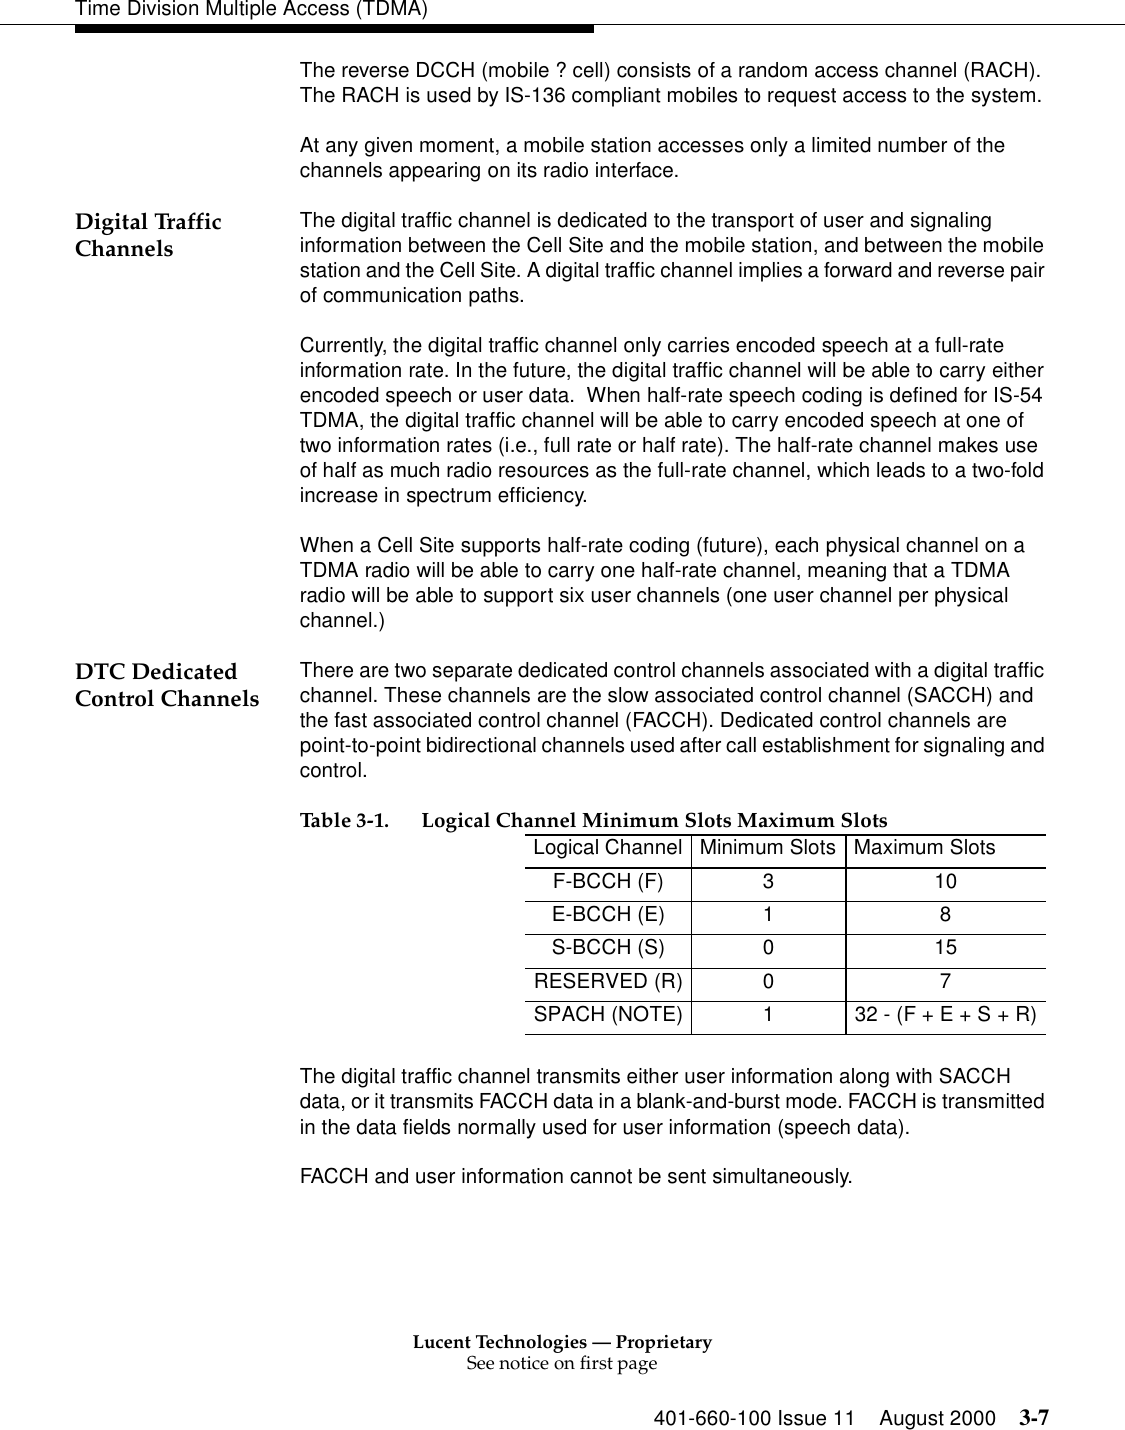 Lucent Technologies — ProprietarySee notice on first page401-660-100 Issue 11 August 2000 3-7Time Division Multiple Access (TDMA)The reverse DCCH (mobile ? cell) consists of a random access channel (RACH). The RACH is used by IS-136 compliant mobiles to request access to the system. At any given moment, a mobile station accesses only a limited number of the channels appearing on its radio interface. Digital Traffic Channels The digital traffic channel is dedicated to the transport of user and signaling information between the Cell Site and the mobile station, and between the mobile station and the Cell Site. A digital traffic channel implies a forward and reverse pair of communication paths. Currently, the digital traffic channel only carries encoded speech at a full-rate information rate. In the future, the digital traffic channel will be able to carry either encoded speech or user data.  When half-rate speech coding is defined for IS-54 TDMA, the digital traffic channel will be able to carry encoded speech at one of two information rates (i.e., full rate or half rate). The half-rate channel makes use of half as much radio resources as the full-rate channel, which leads to a two-fold increase in spectrum efficiency. When a Cell Site supports half-rate coding (future), each physical channel on a TDMA radio will be able to carry one half-rate channel, meaning that a TDMA radio will be able to support six user channels (one user channel per physical channel.) DTC Dedicated Control Channels There are two separate dedicated control channels associated with a digital traffic channel. These channels are the slow associated control channel (SACCH) and the fast associated control channel (FACCH). Dedicated control channels are point-to-point bidirectional channels used after call establishment for signaling and control. The digital traffic channel transmits either user information along with SACCH data, or it transmits FACCH data in a blank-and-burst mode. FACCH is transmitted in the data fields normally used for user information (speech data). FACCH and user information cannot be sent simultaneously. Table 3-1. Logical Channel Minimum Slots Maximum SlotsLogical Channel Minimum Slots Maximum SlotsF-BCCH (F) 3 10E-BCCH (E) 1 8S-BCCH (S) 0 15RESERVED (R) 0 7SPACH (NOTE) 1 32 - (F + E + S + R)